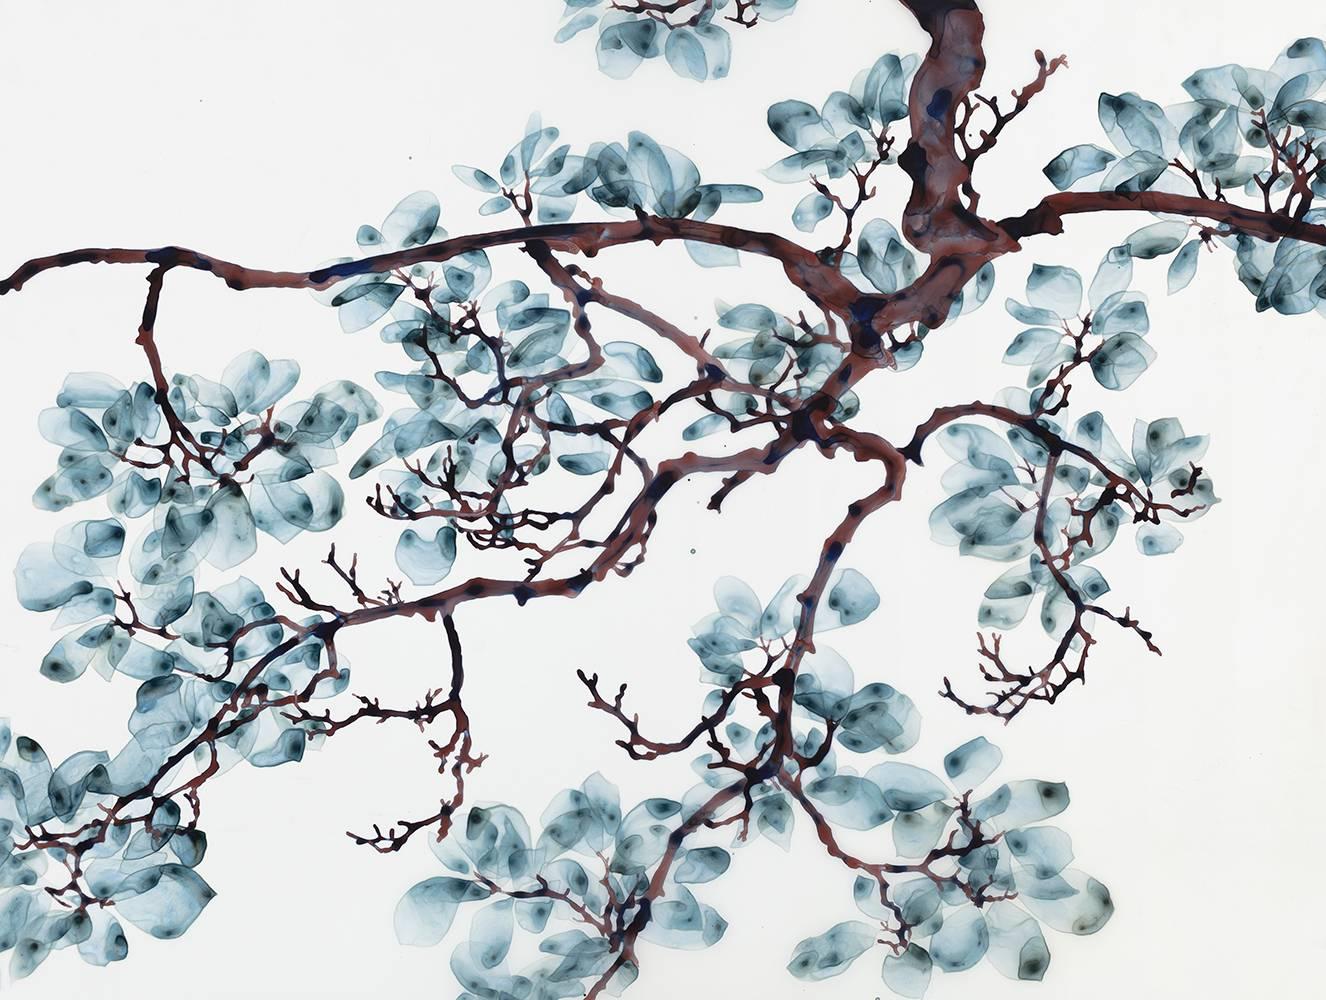 Jackie Battenfield Abstract Painting - Spring Snap, Botanical Painting on Mylar with Teal Blue Leaves on Brown Branches